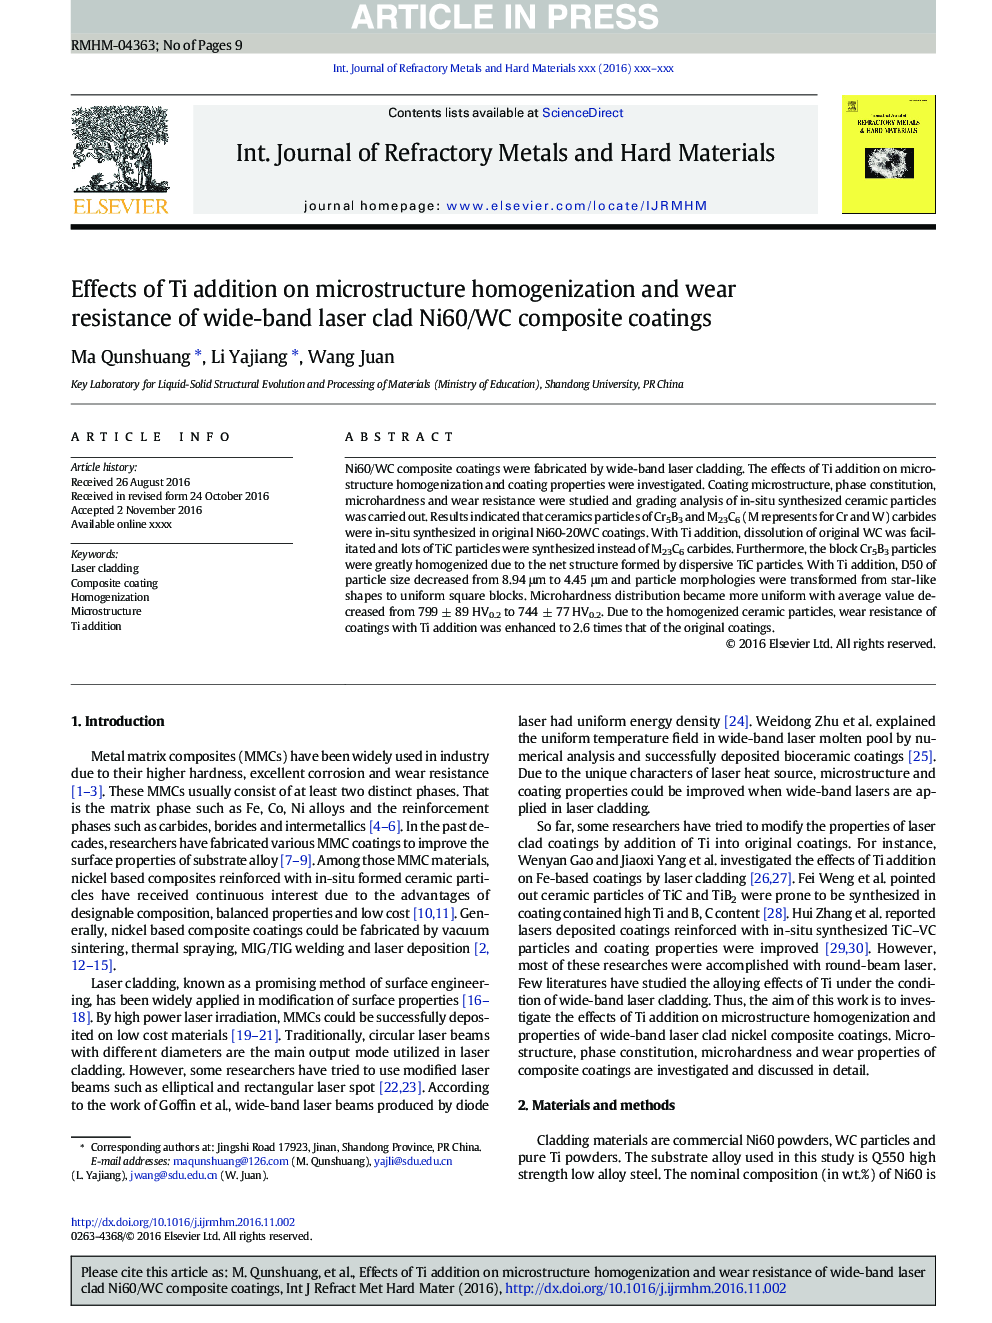 Effects of Ti addition on microstructure homogenization and wear resistance of wide-band laser clad Ni60/WC composite coatings